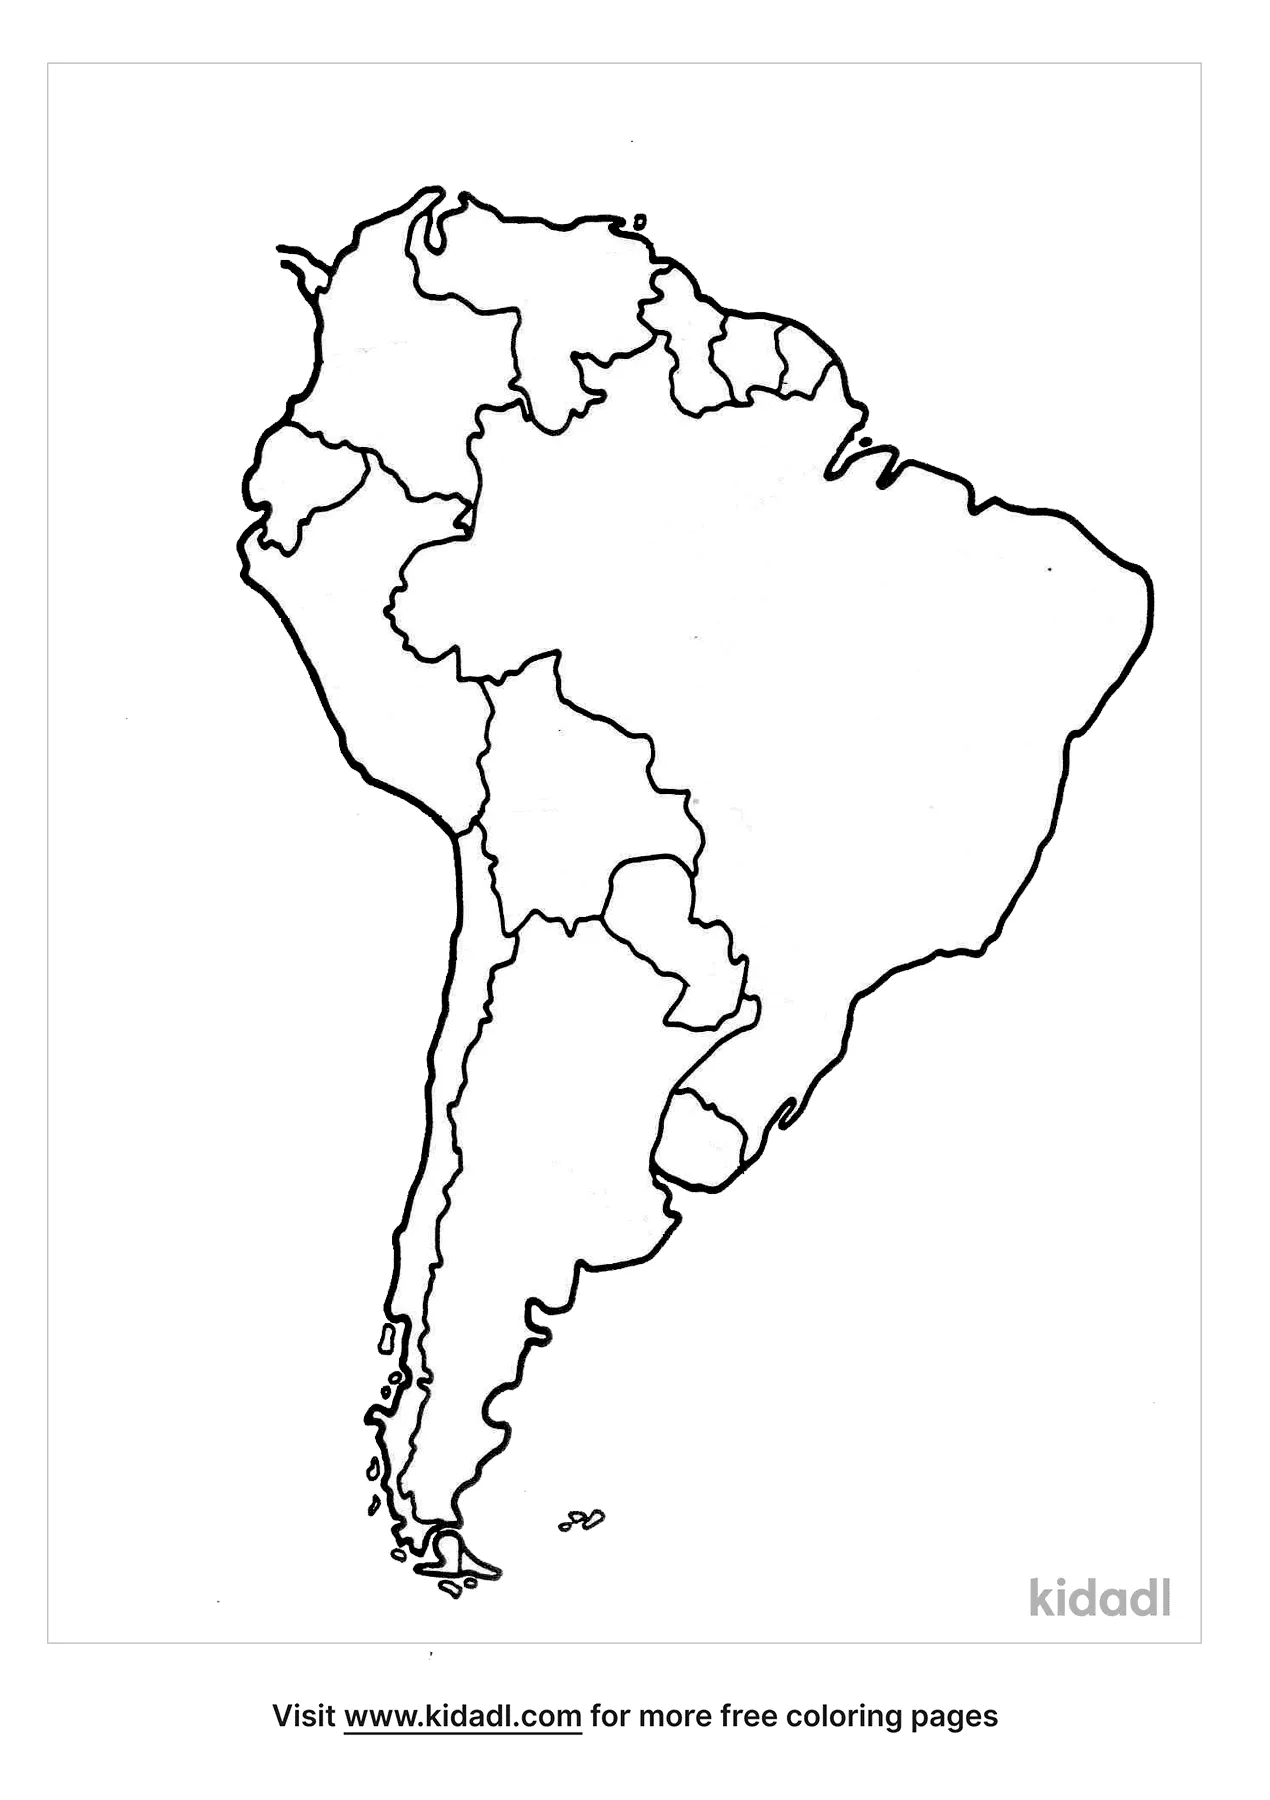 Free south america map coloring page coloring page printables